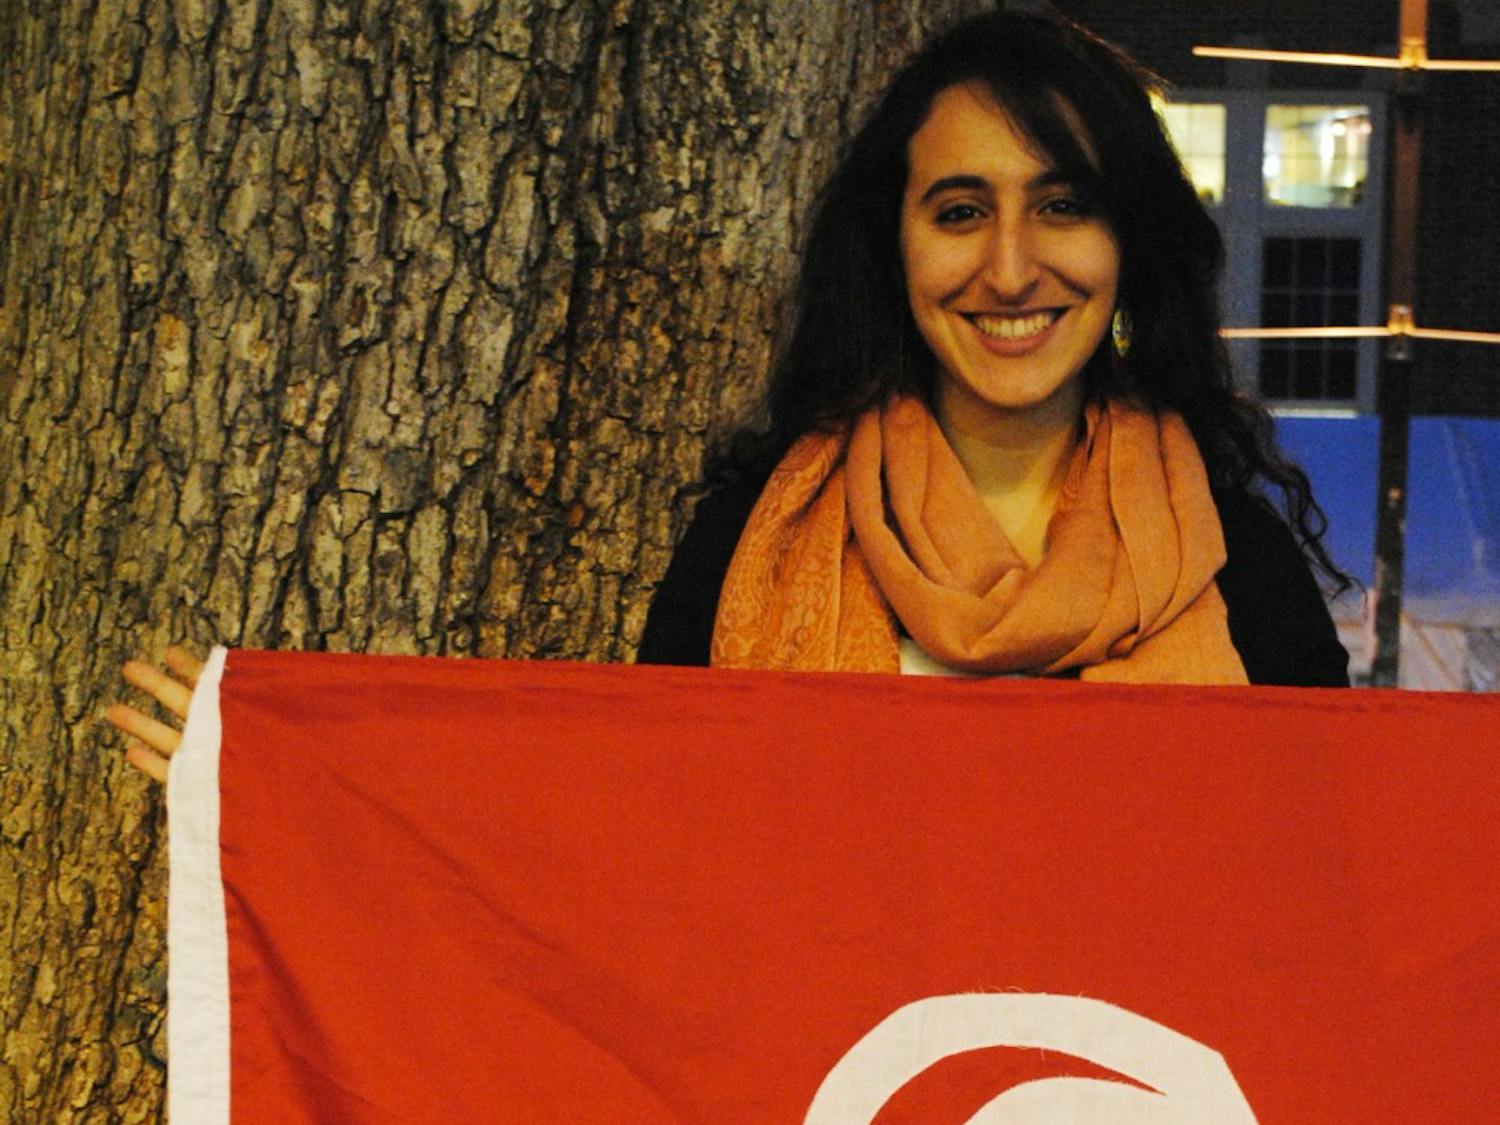 	Senior political science and religious studies major Mariem Masmoudi is traveling to Tunisia on Friday amid political unrest to help promote democracy and focus on youth empowerment.  Masmoudi plans to return to UNC this fall and graduate in December.